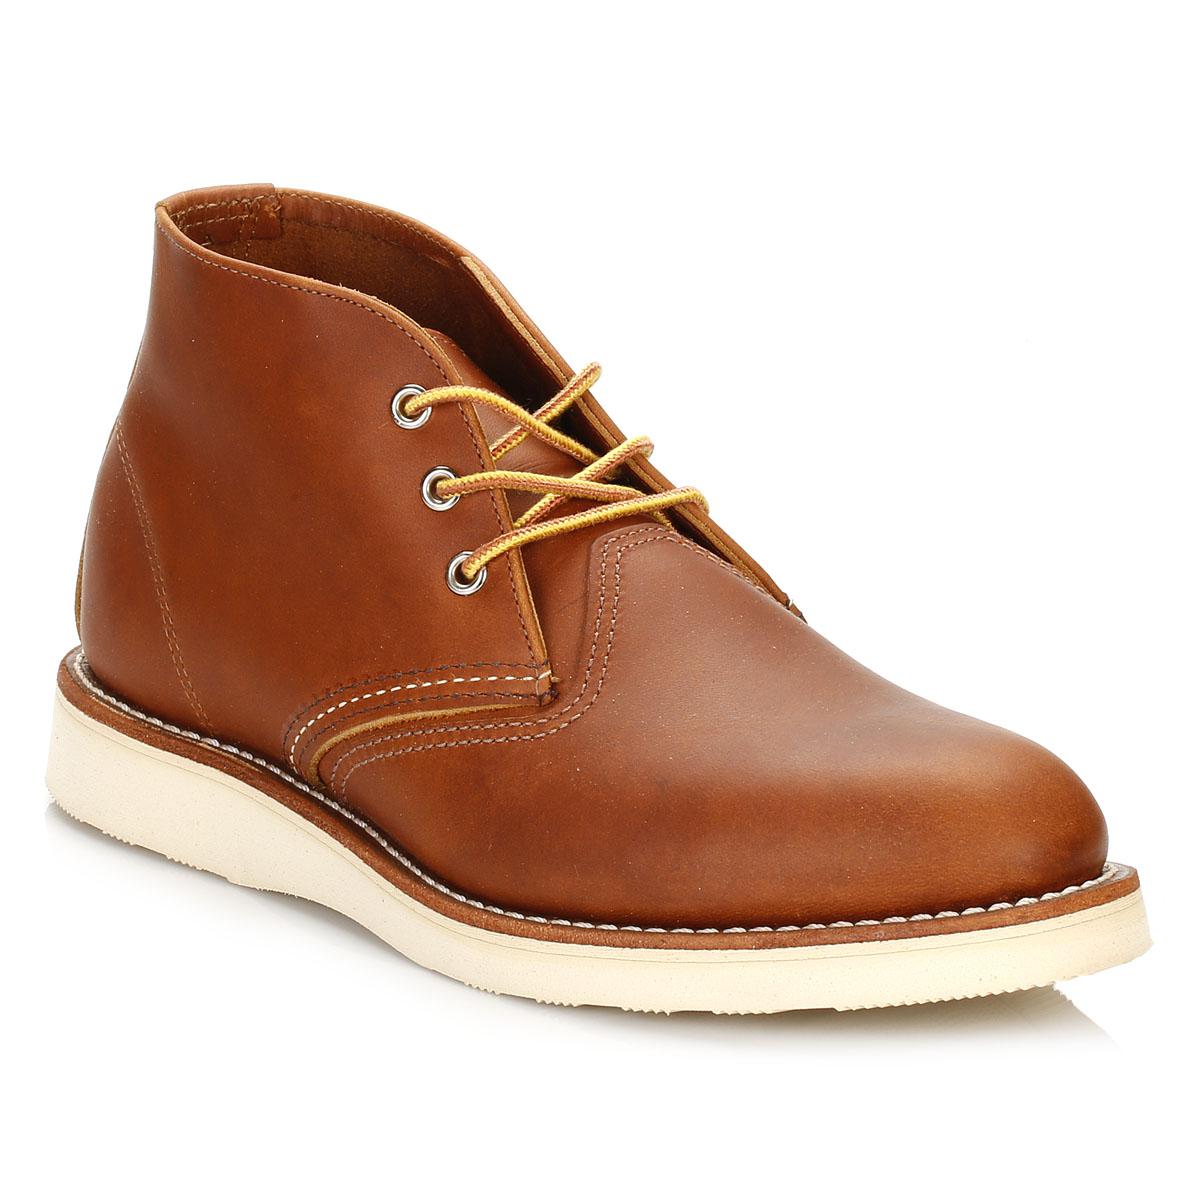 Lyst - Red Wing Mens Oro-iginal Work Chukka Boots in Brown for Men